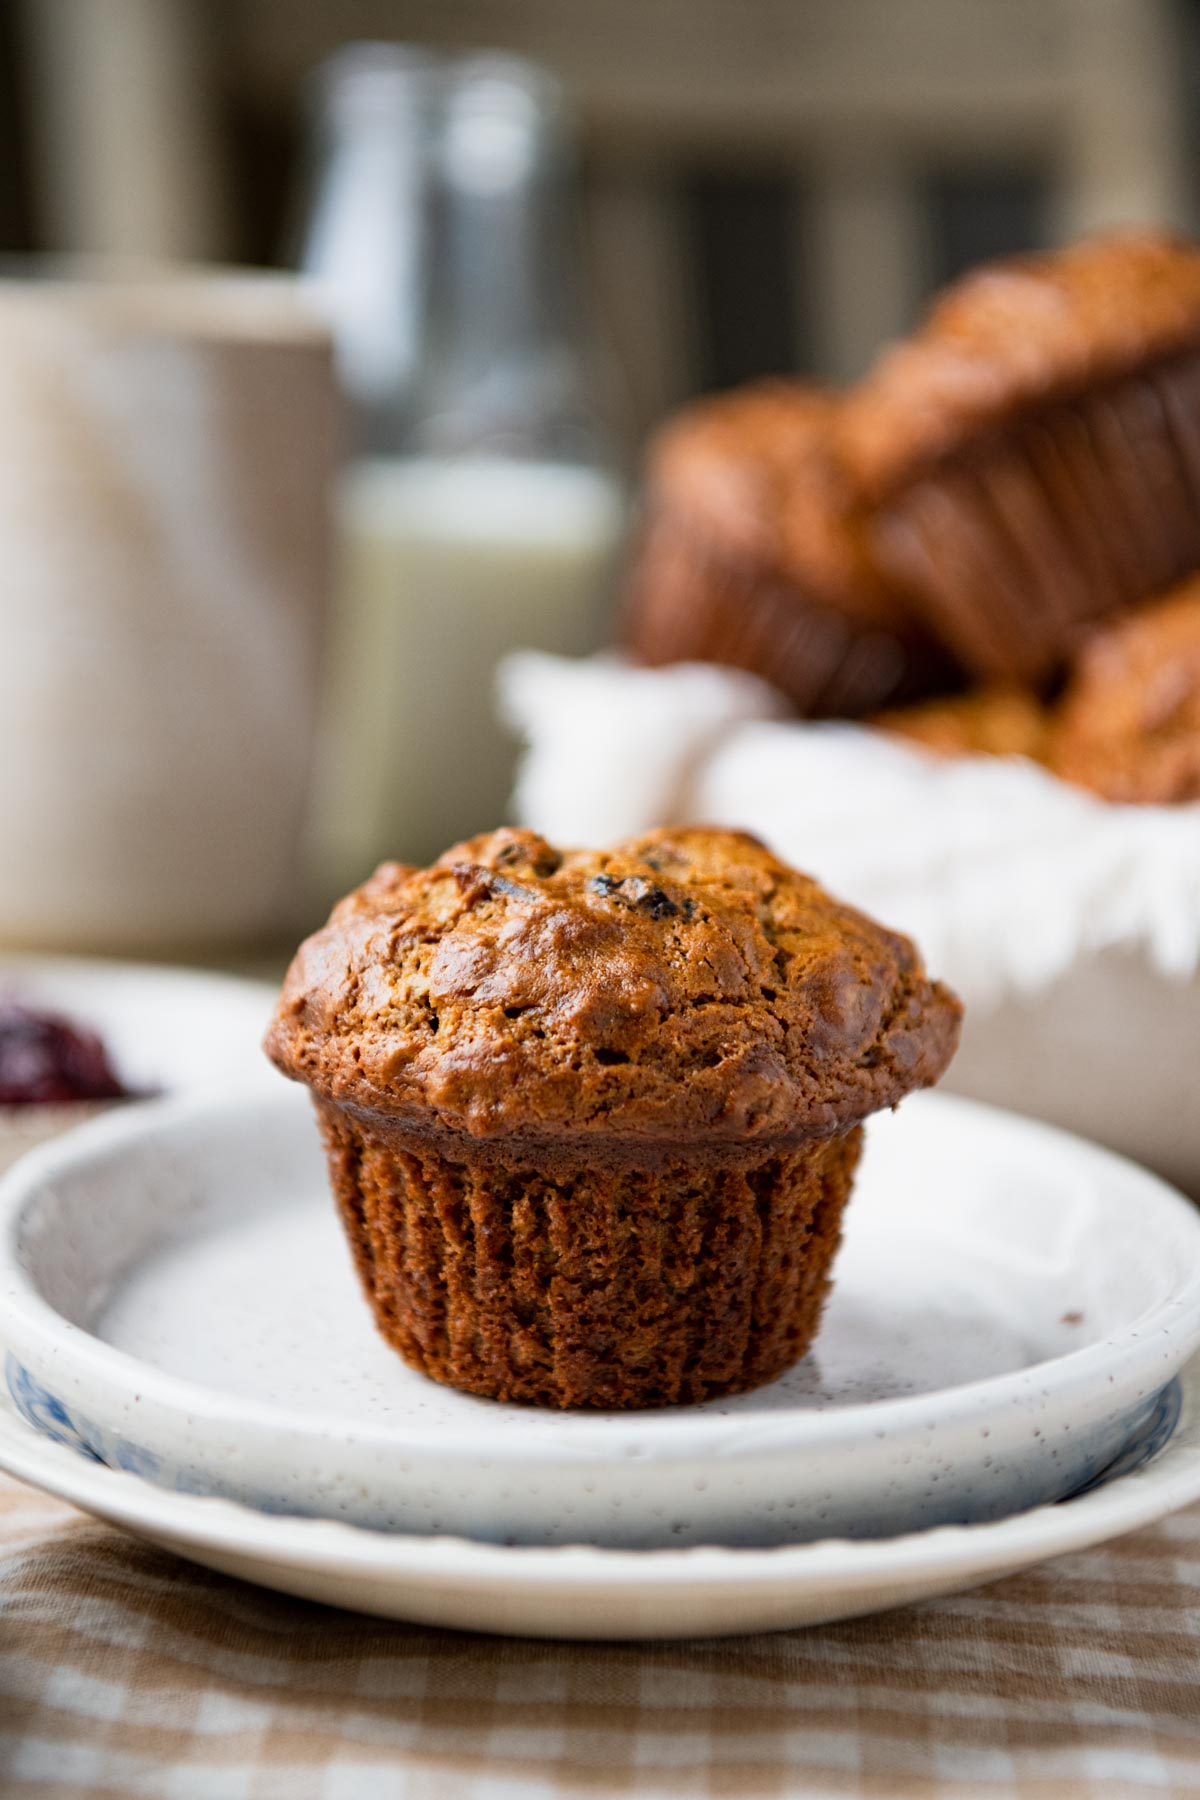 The best bran muffin recipe served on a little white plate